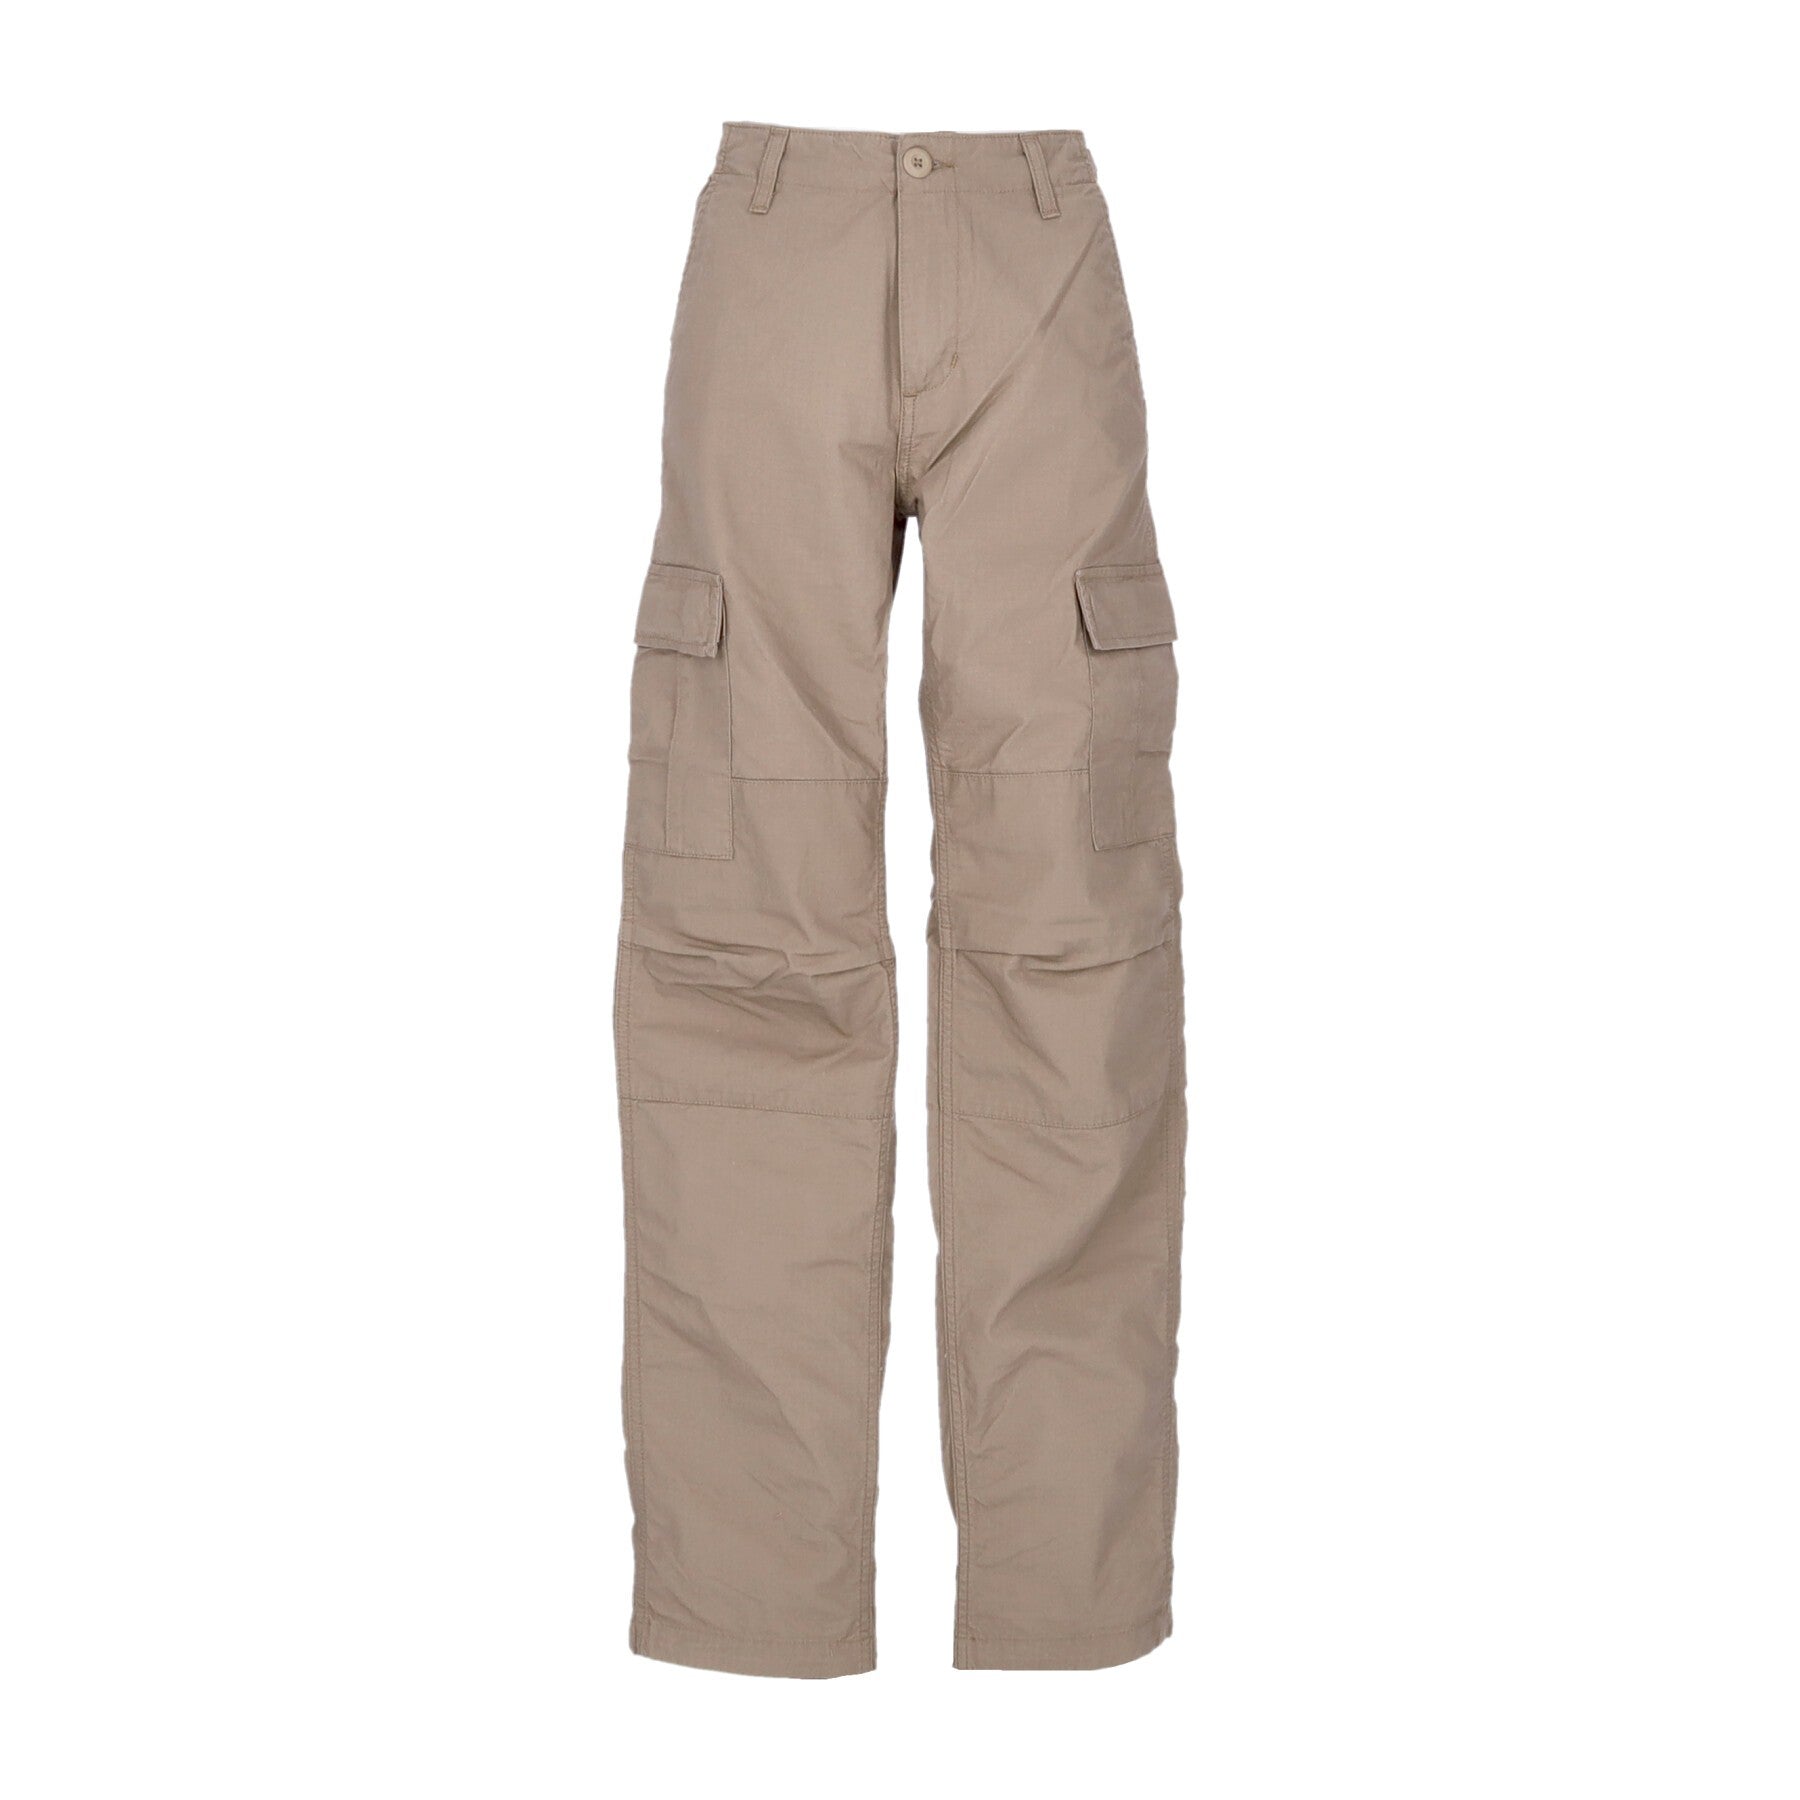 Long Men's Aviation Pant Leather Rinsed